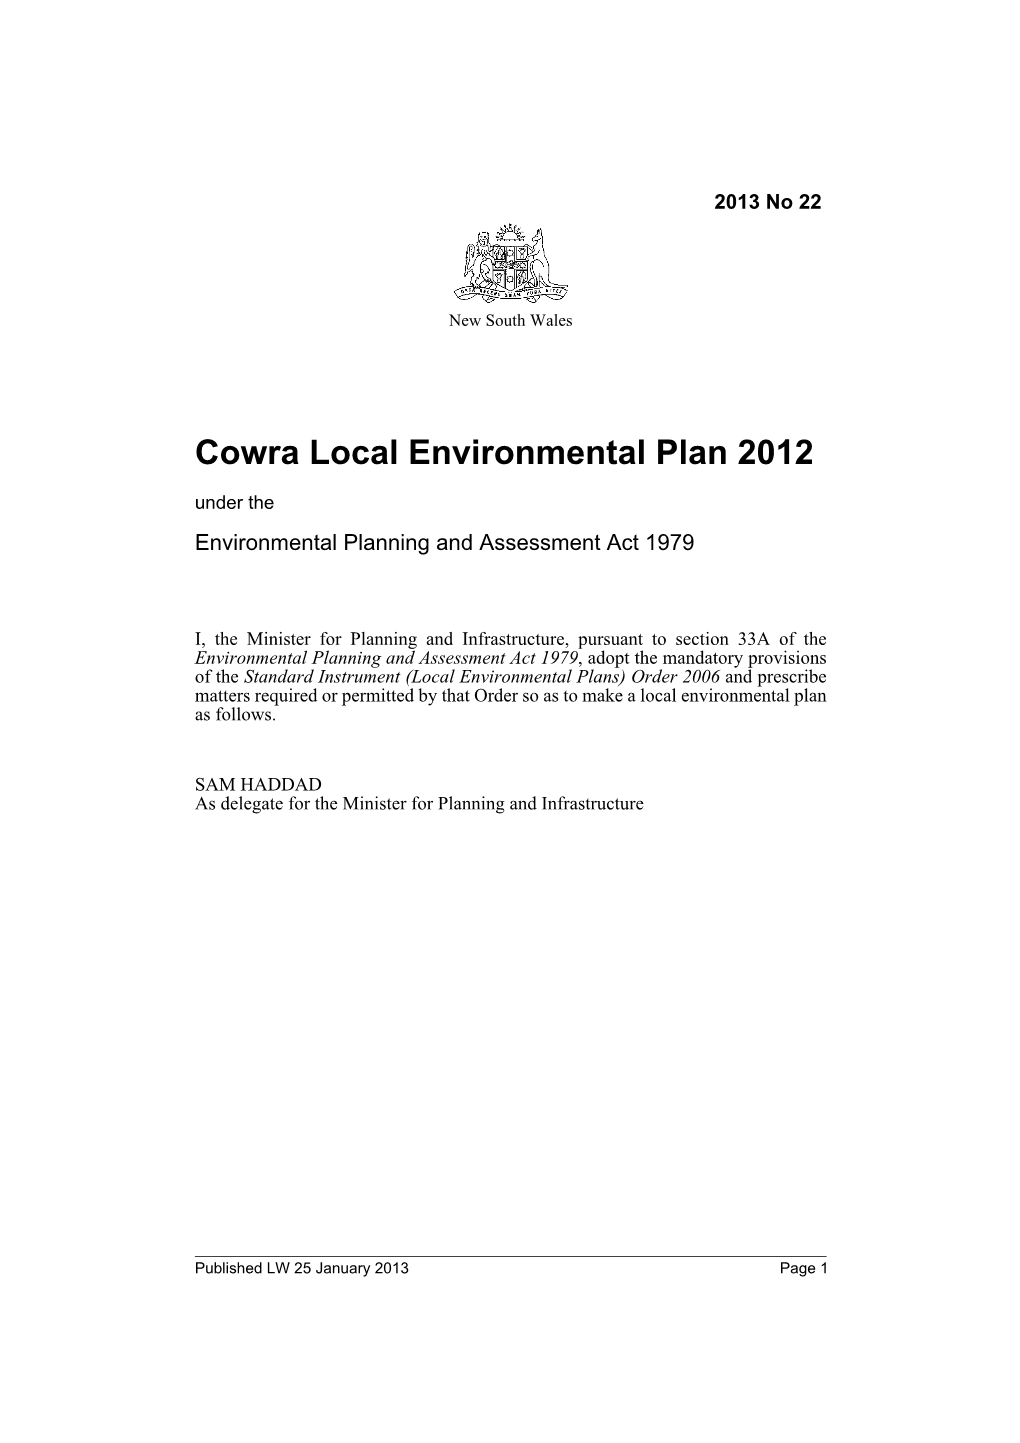 Cowra Local Environmental Plan 2012 Under the Environmental Planning and Assessment Act 1979